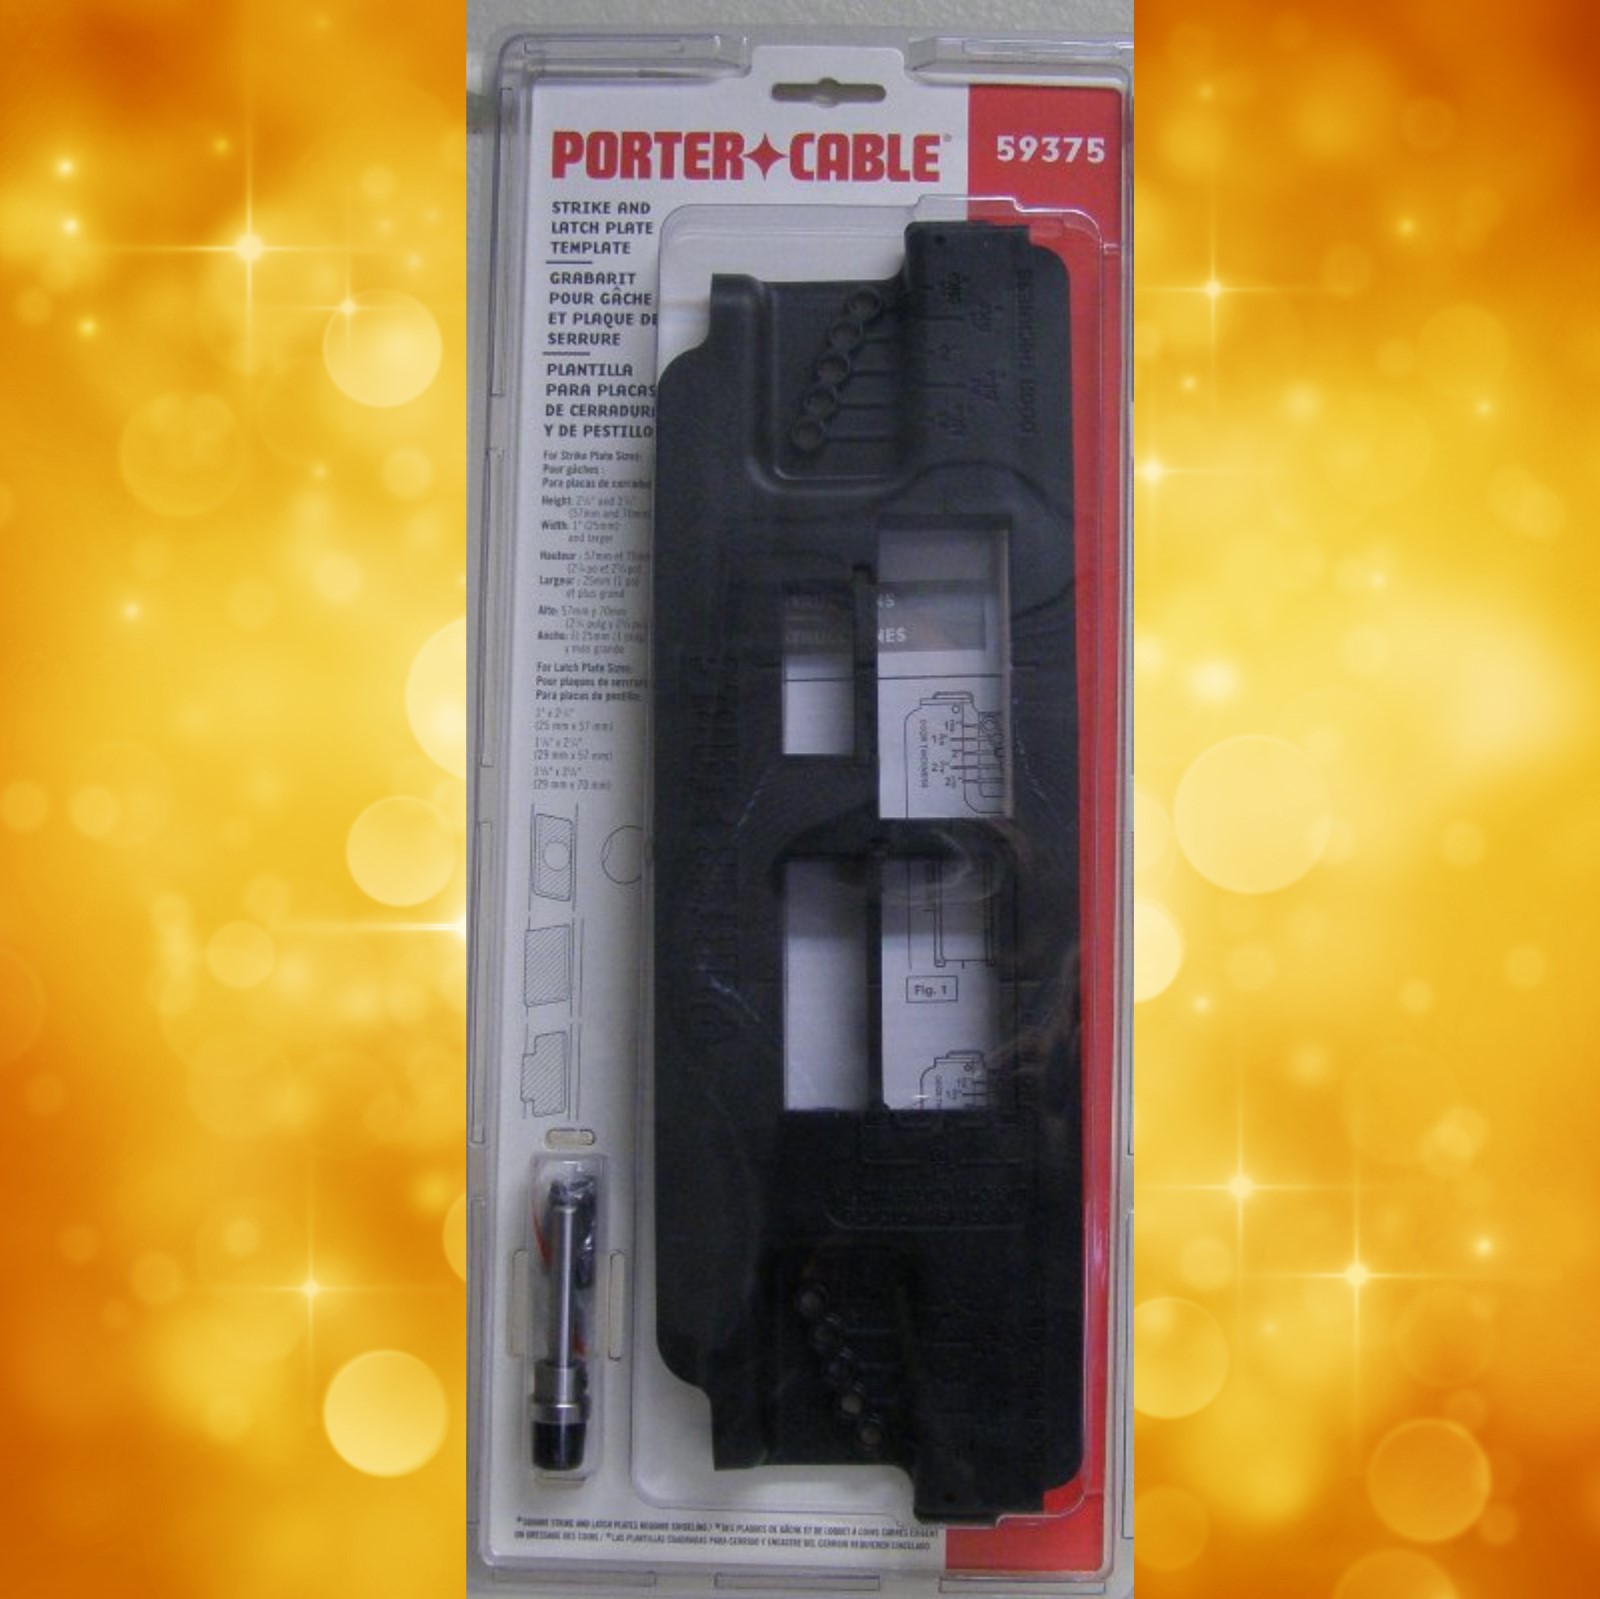 Porter-Cable Strike and Latch Templet 59375 Mike's Tools